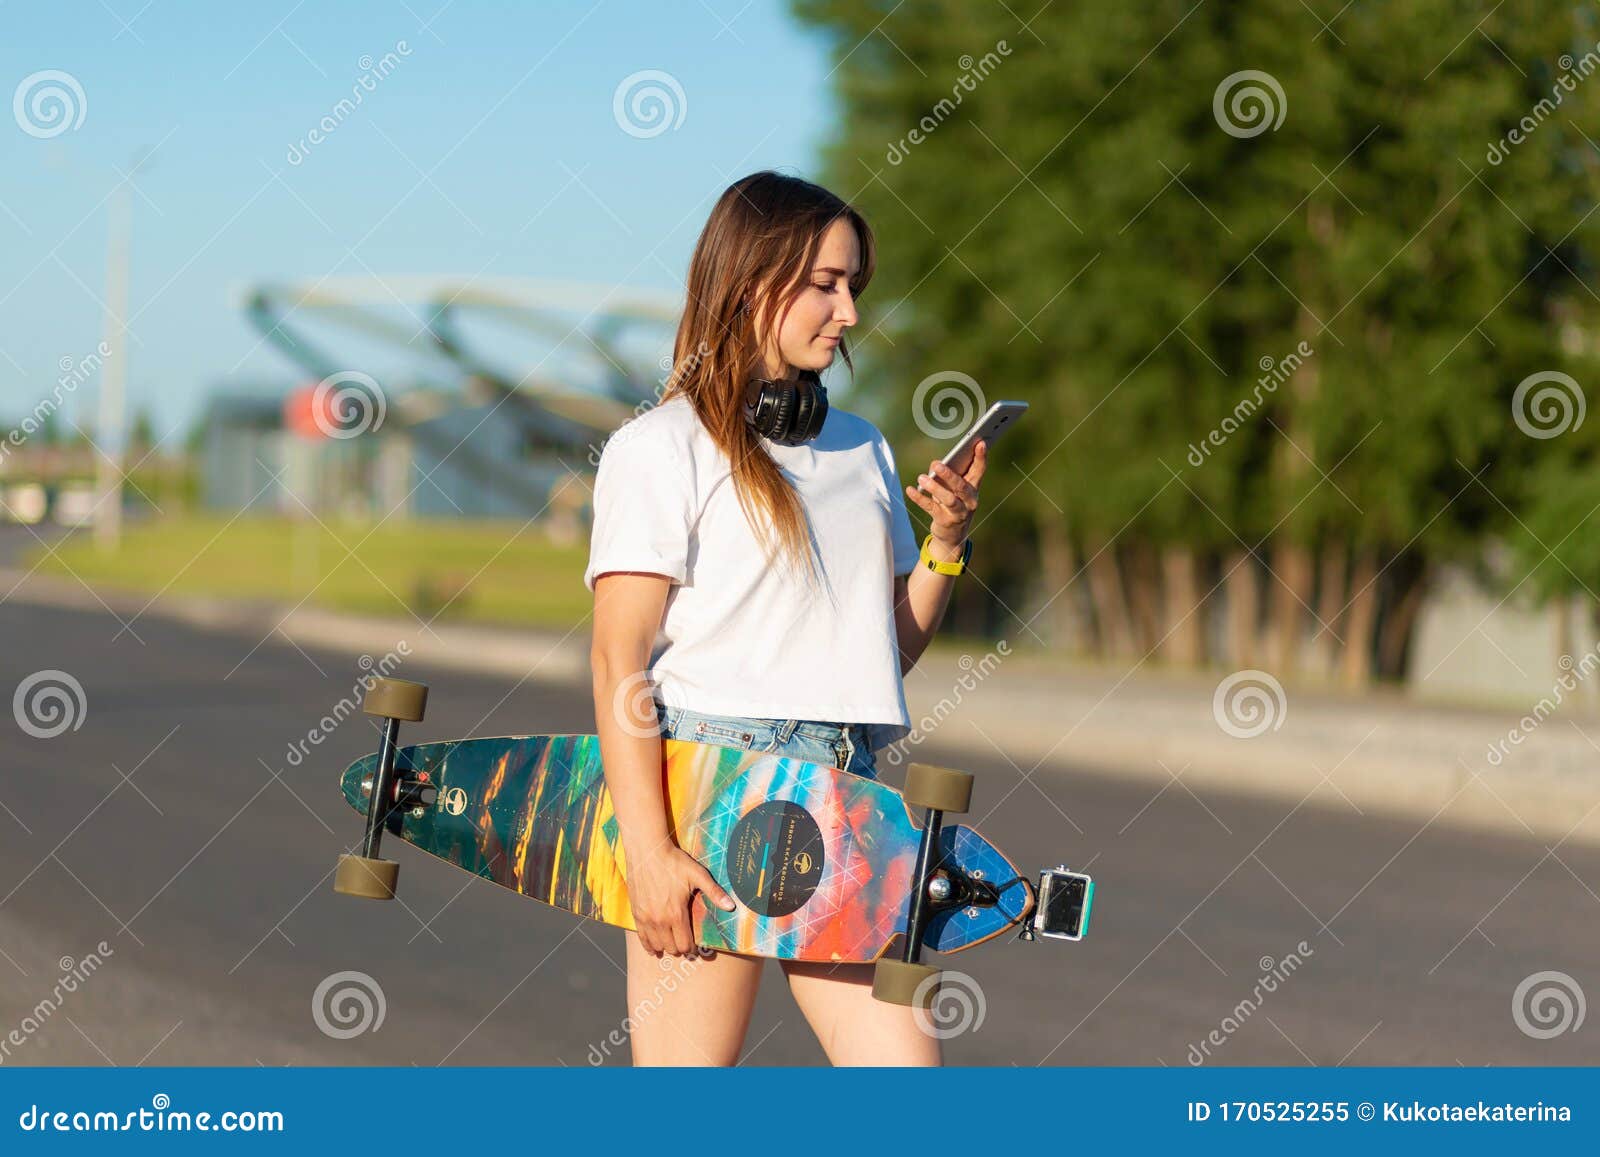 wool Sanctuary Inactive Stylish Girl in White Stockings Walking with Longboard Stock Image - Image  of beauty, modern: 170525255